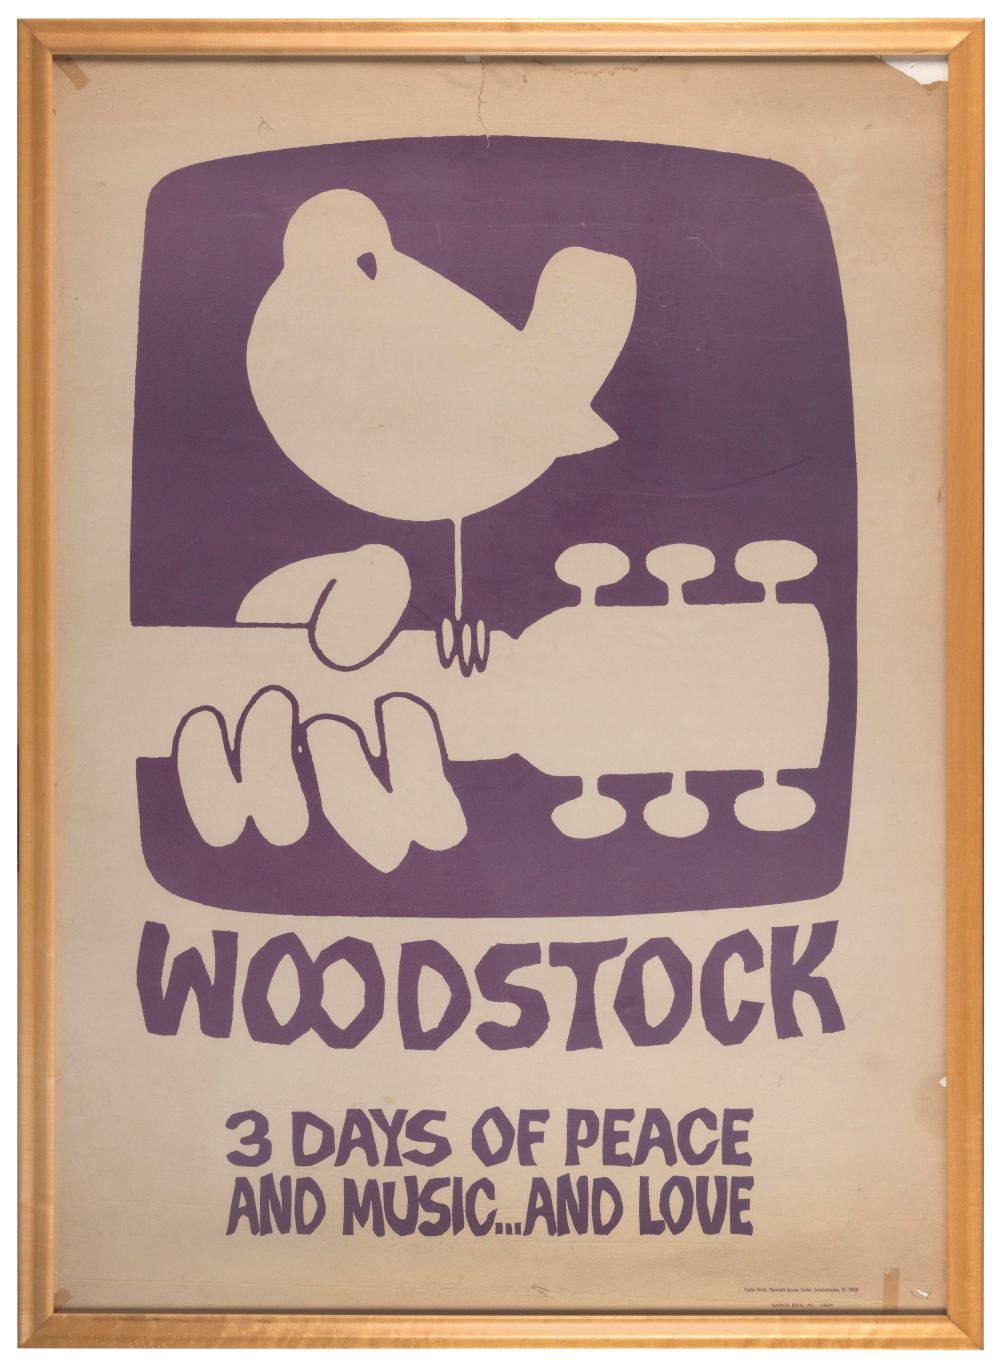  WOODSTOCK 3 DAYS OF PEACE AND 2f18d7